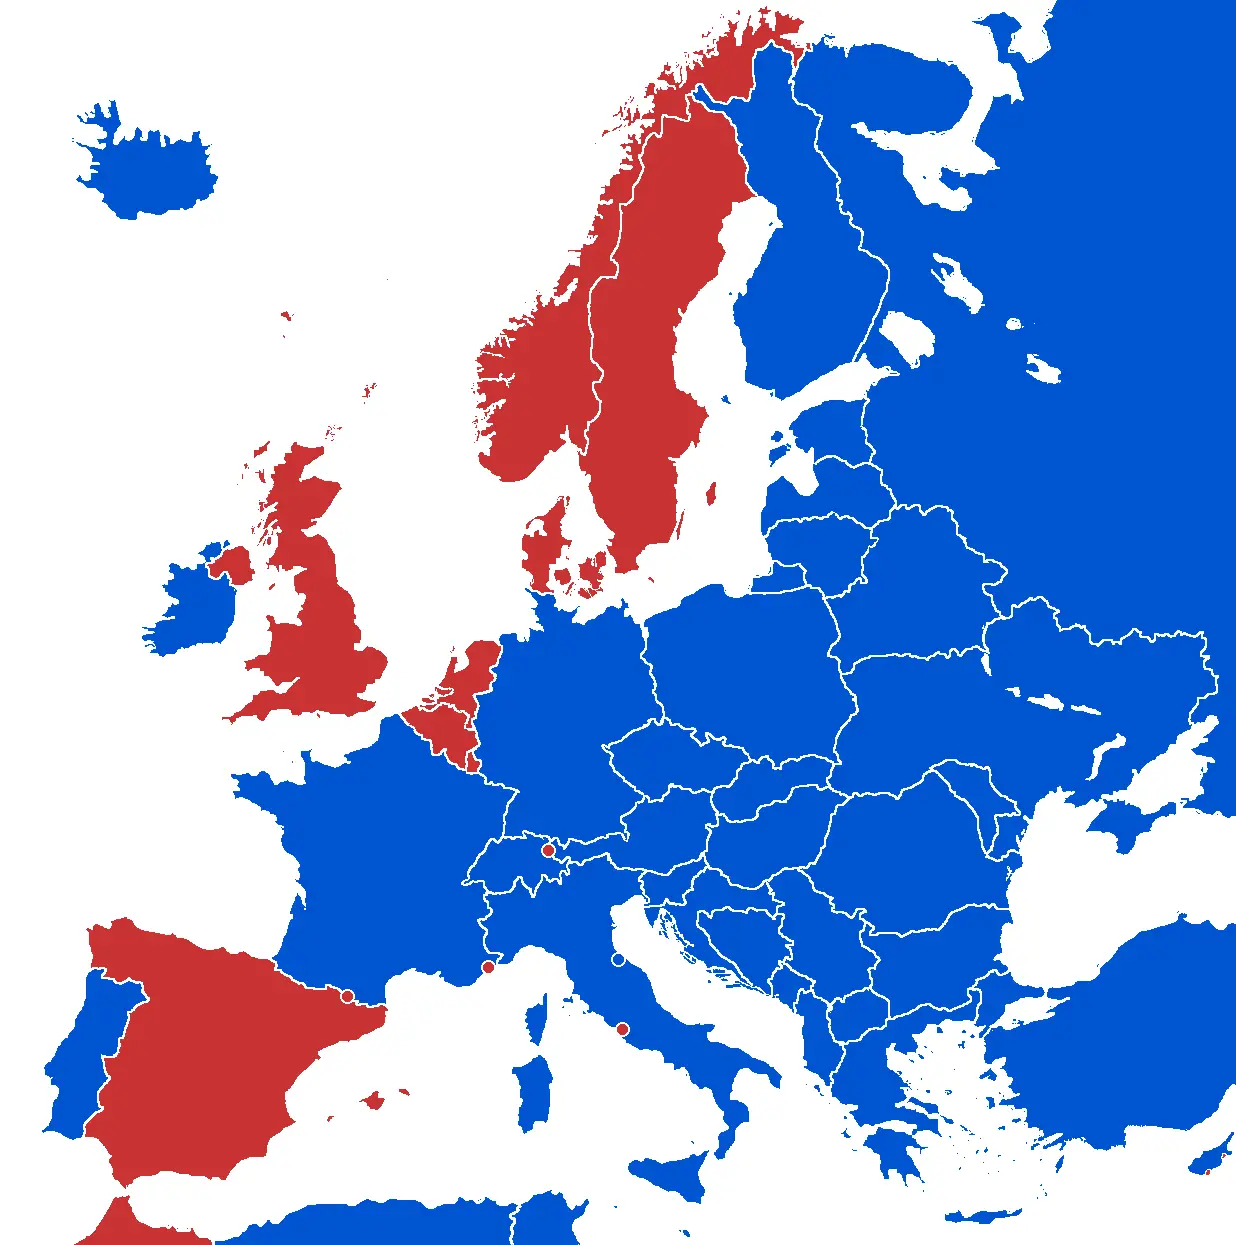 European States By Head of State